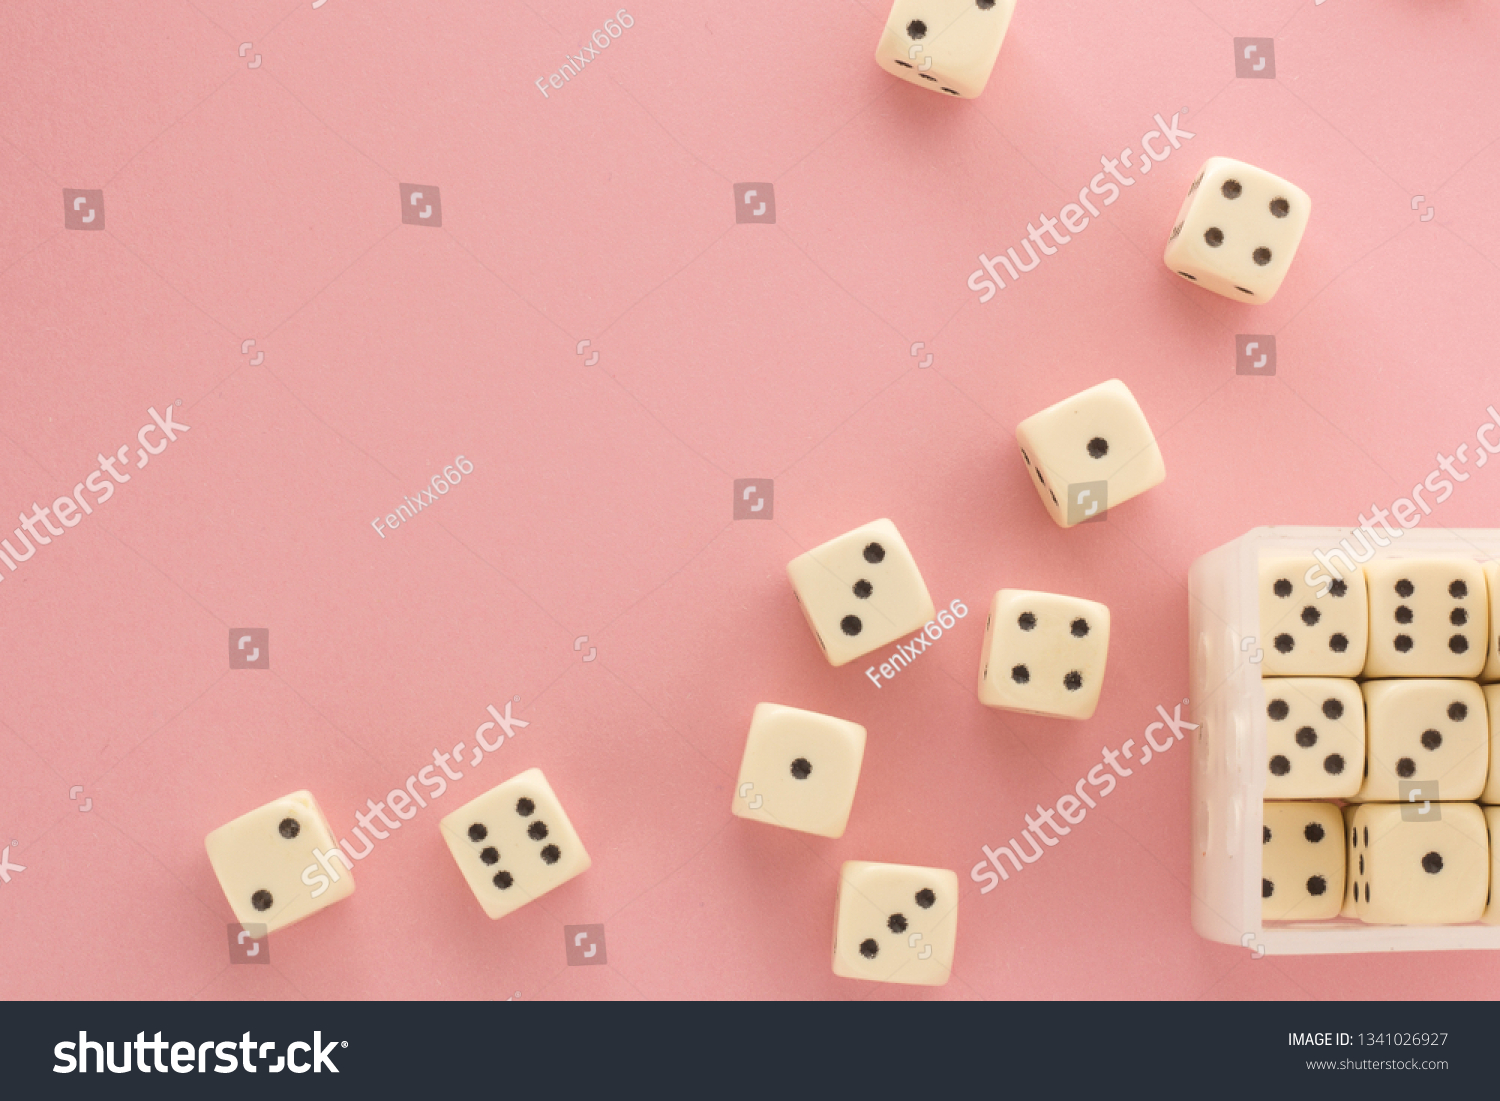 White gaming dices on pink background. victory chance and lucky. Flat lay style, place for text. Top view and Close-up cube. Concept business, gamble and game. Spectacular background pastel. #1341026927